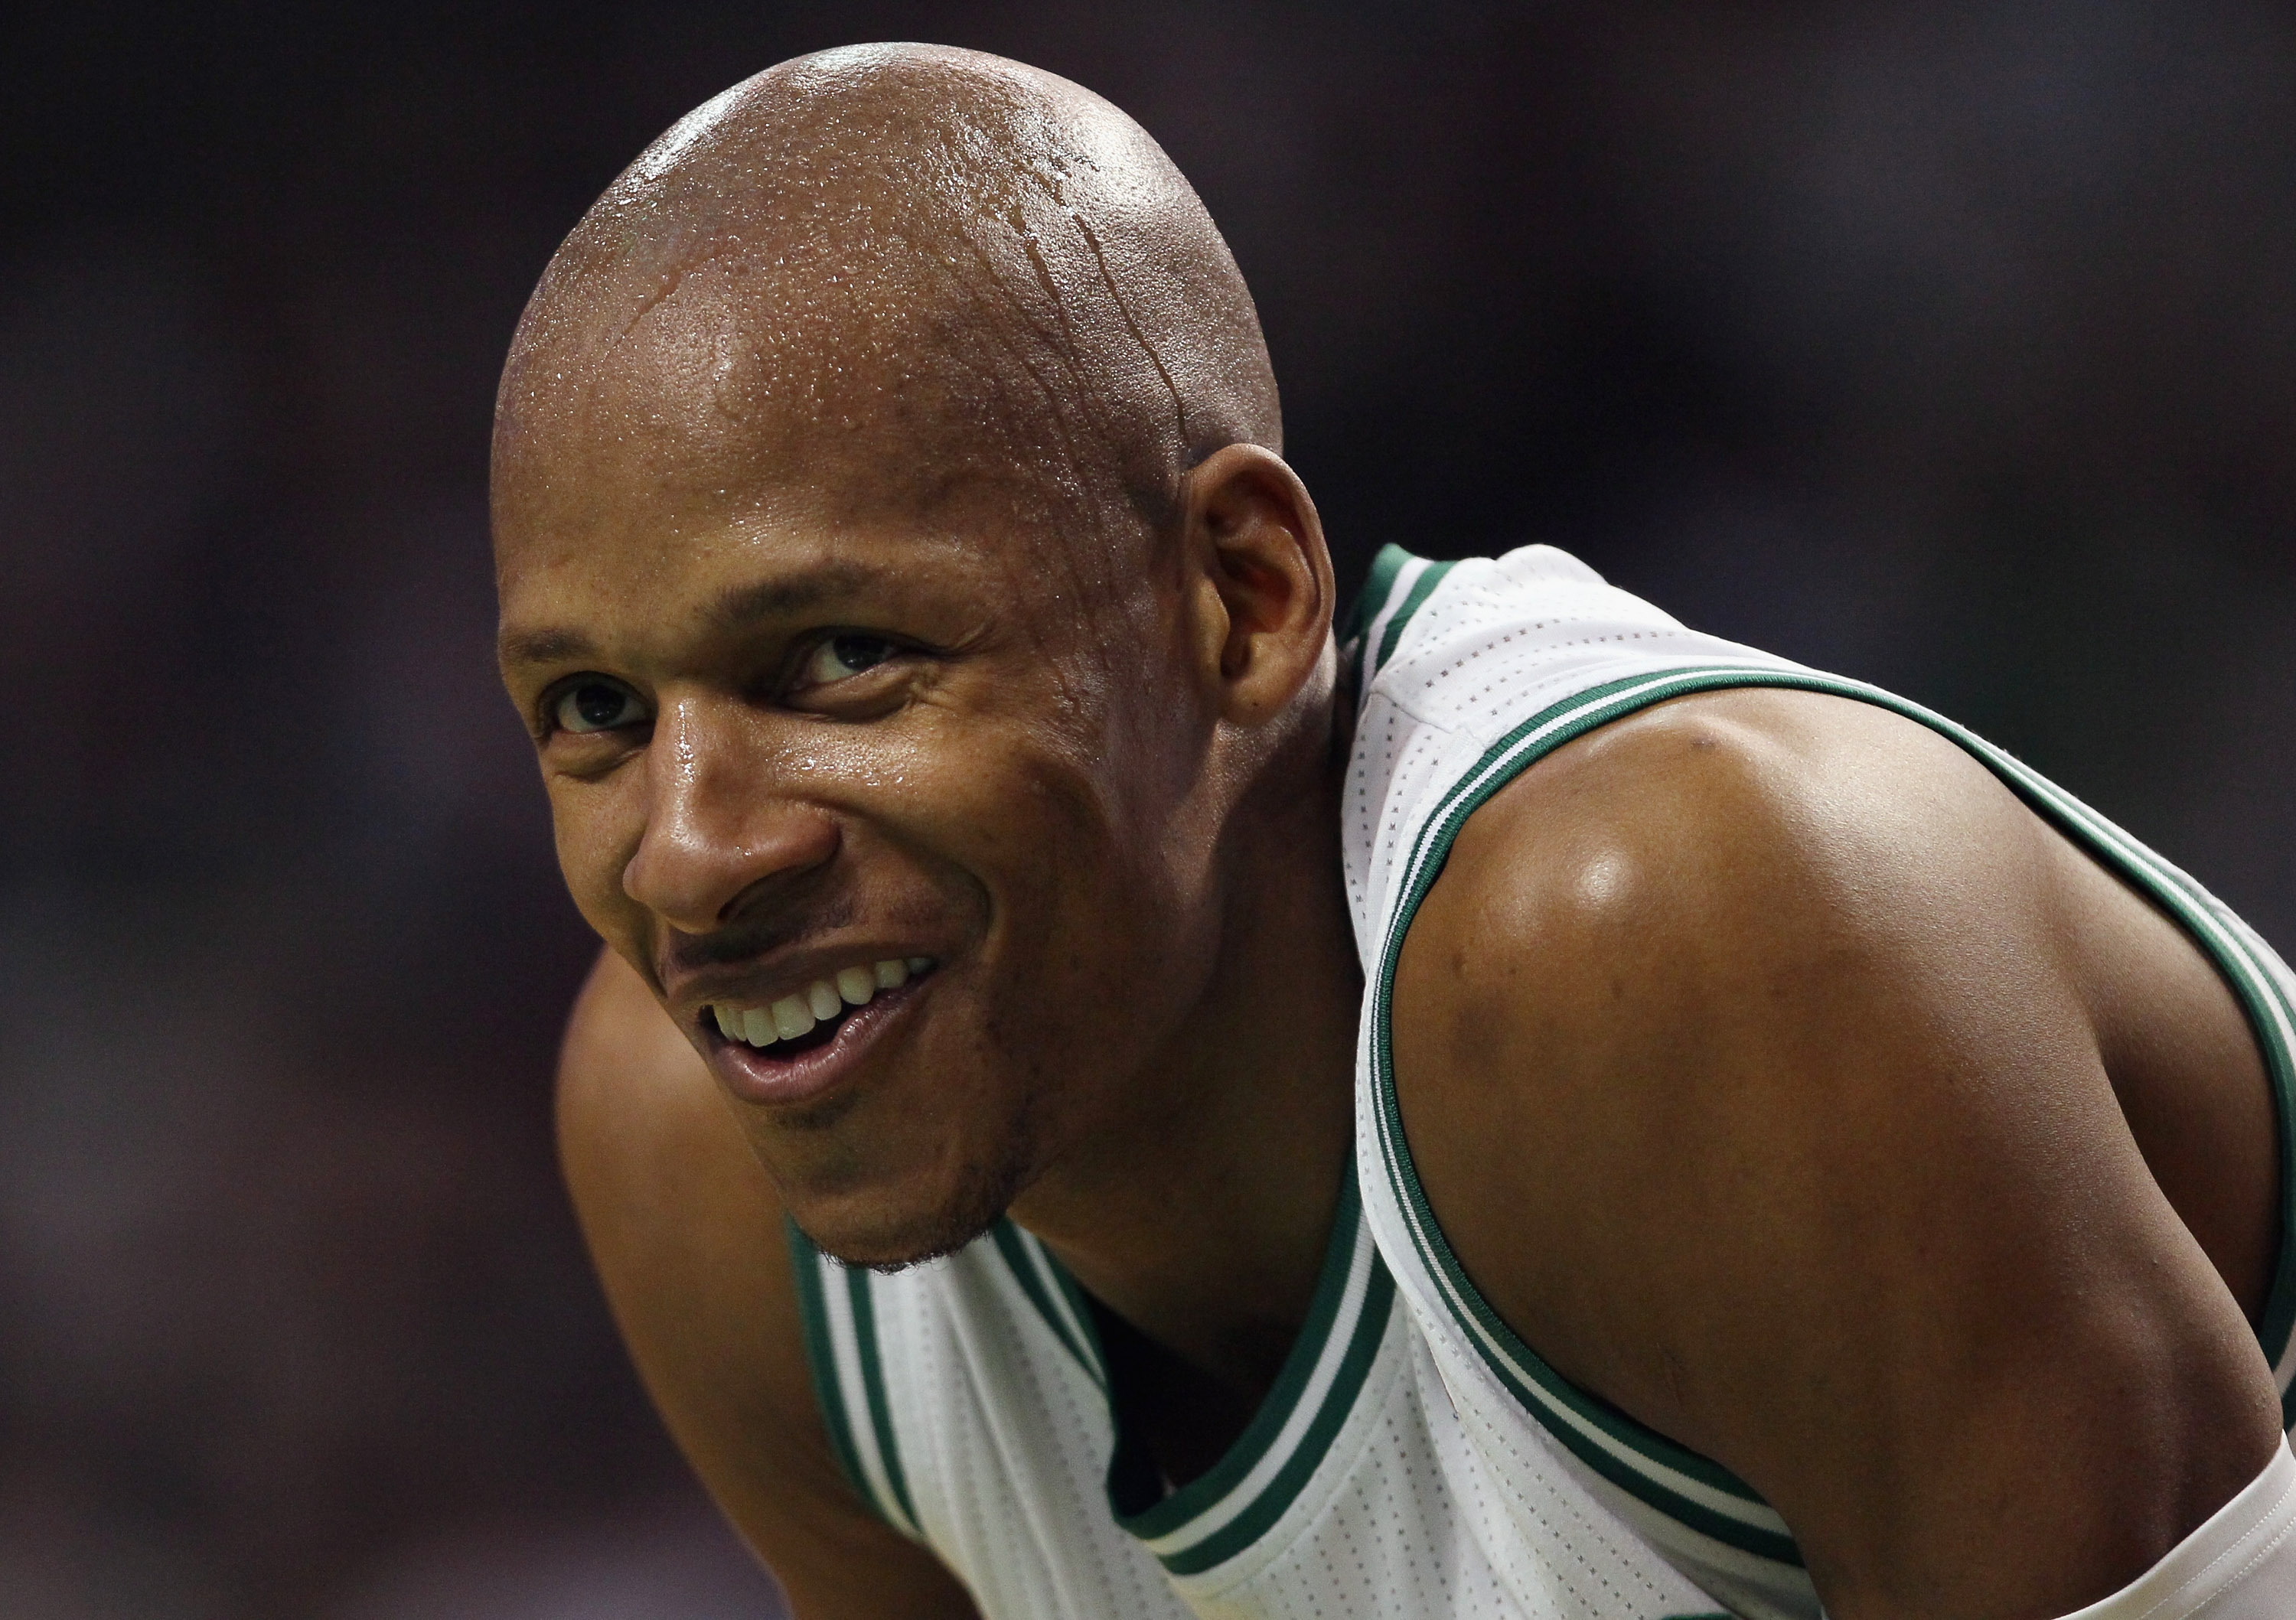 BOSTON, MA - JANUARY 21:  Ray Allen #20 of the Boston Celtics smiles on the baseline as teammate Kevin Garnett shoots a free throw in the third quarter against the Utah Jazz on January 21, 2011 at the TD Garden in Boston, Massachusetts.  The Celtics defea